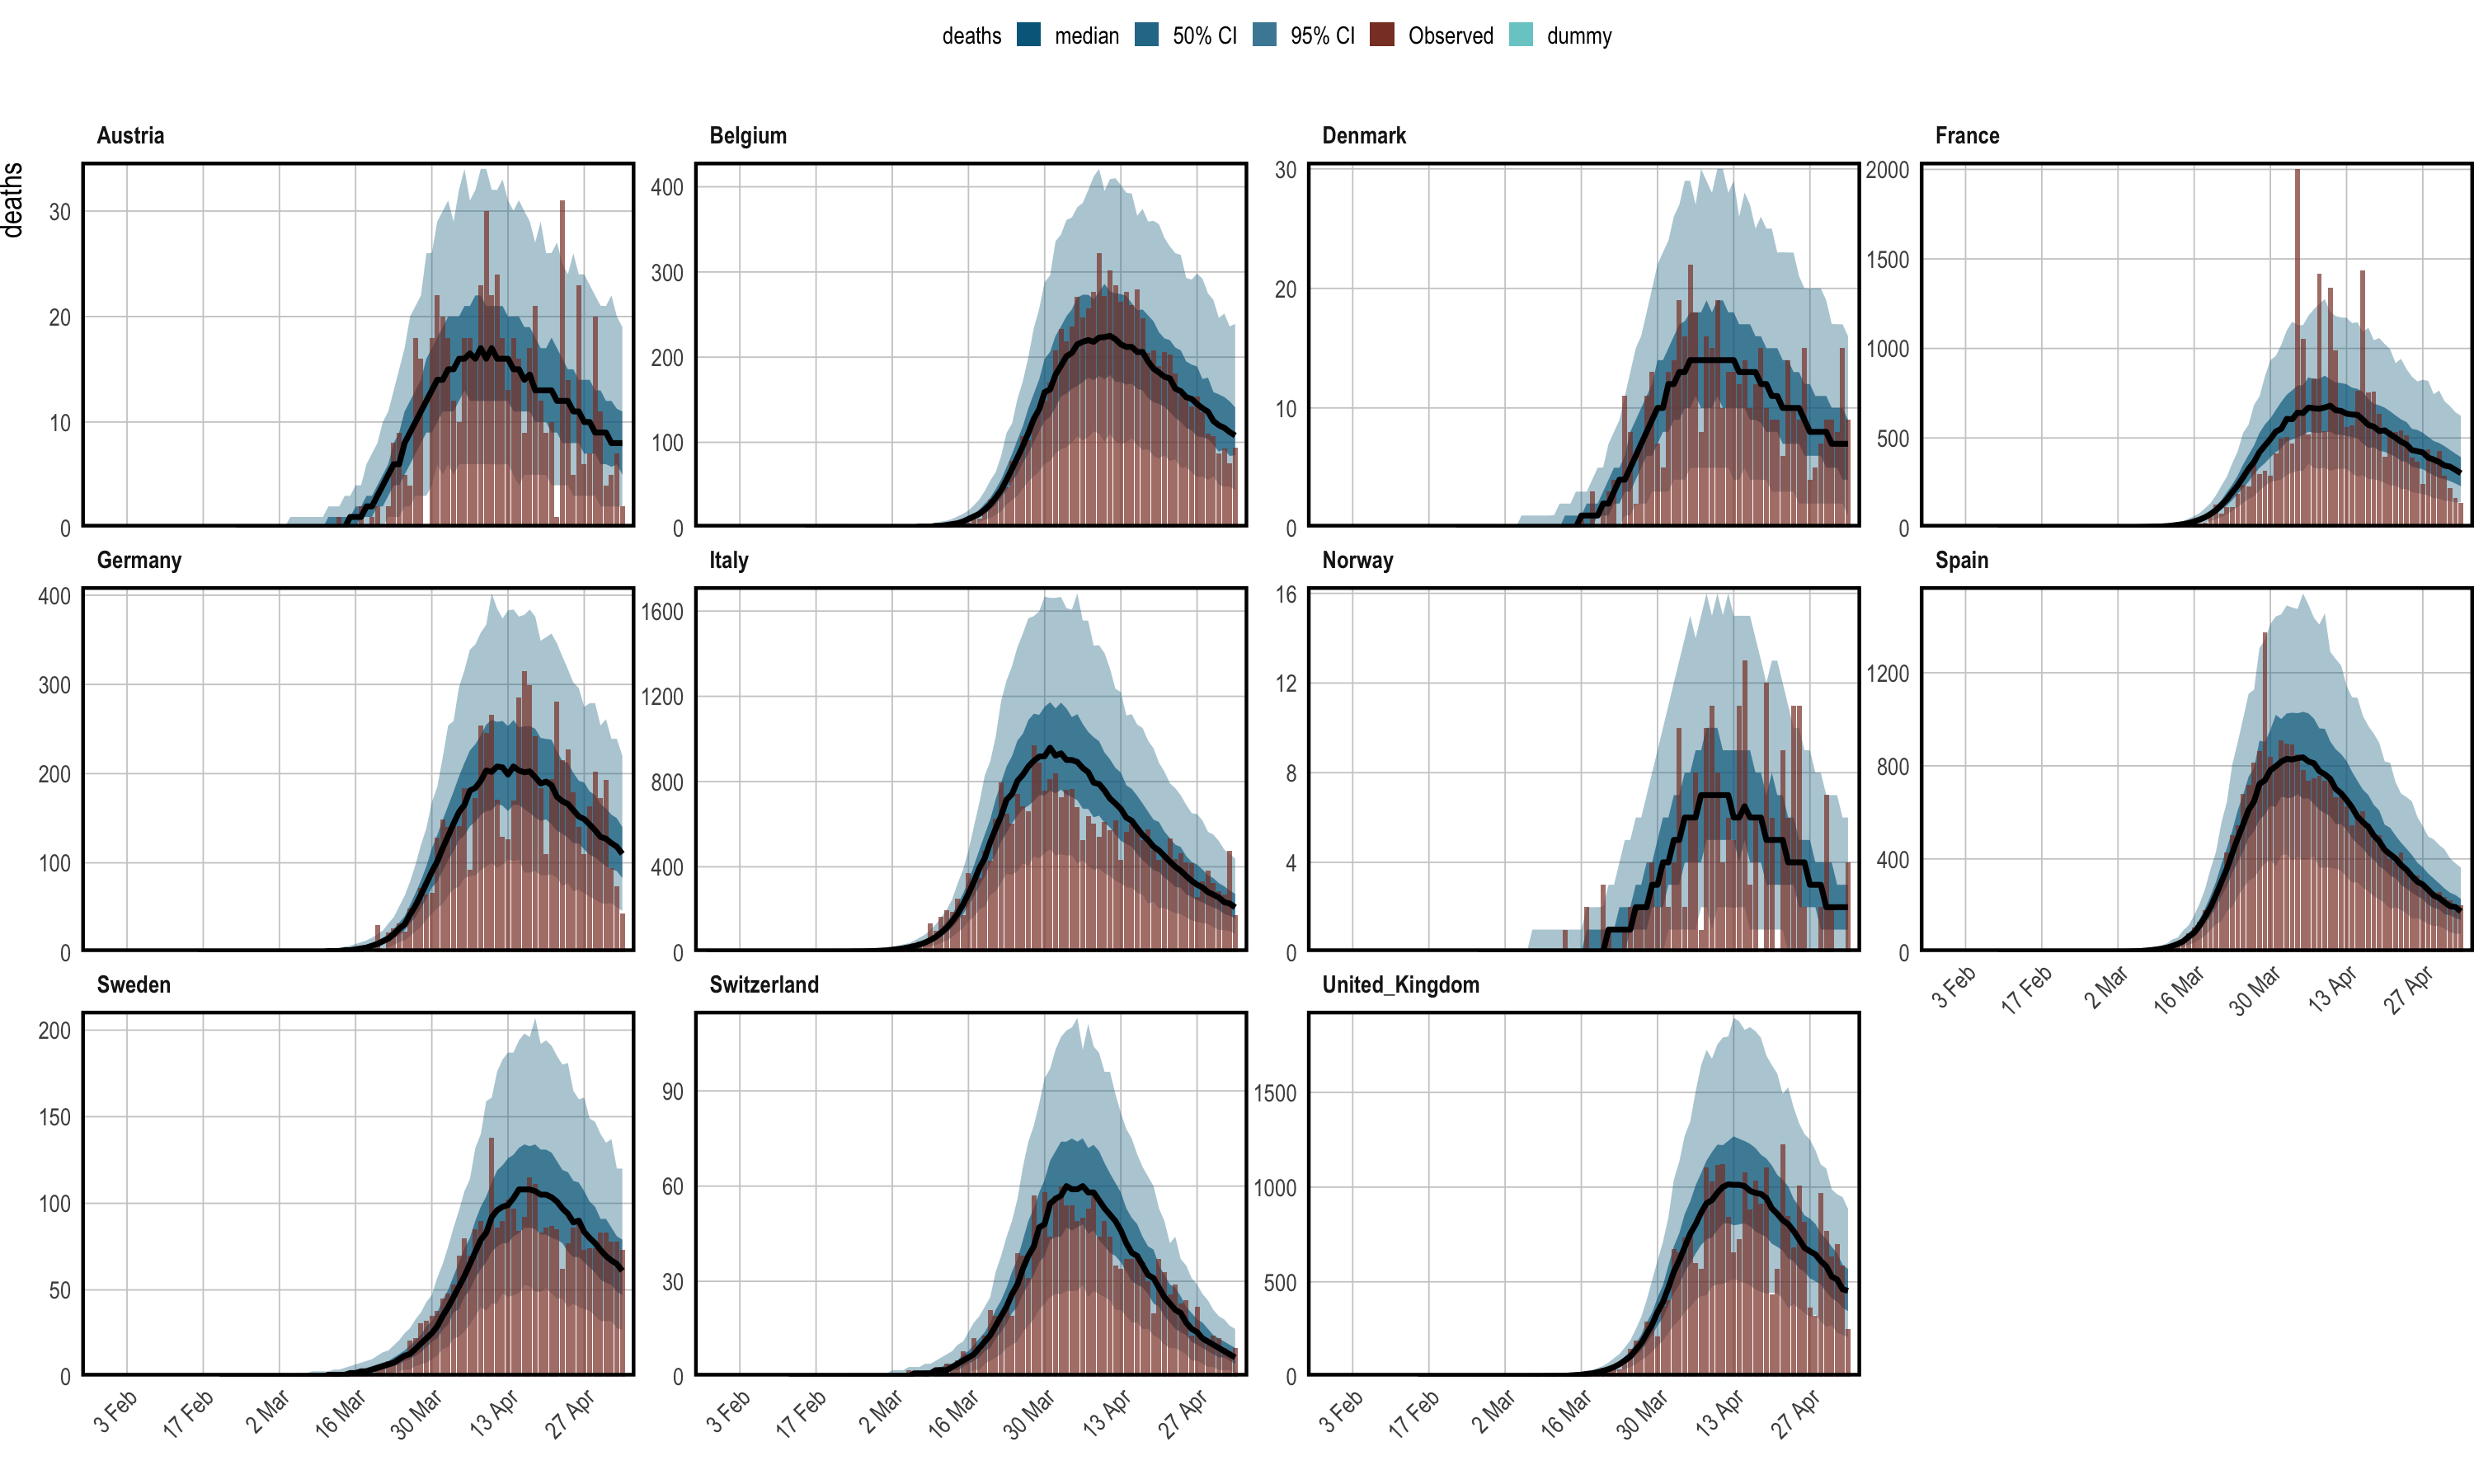 Posterior predictive checks. Observed daily deaths (red) is plotted as a bar plot. Credible intervals from the posterior are plotted in shades of blue, in addition to the posterior median in black. Each panel shows the data for a single country.